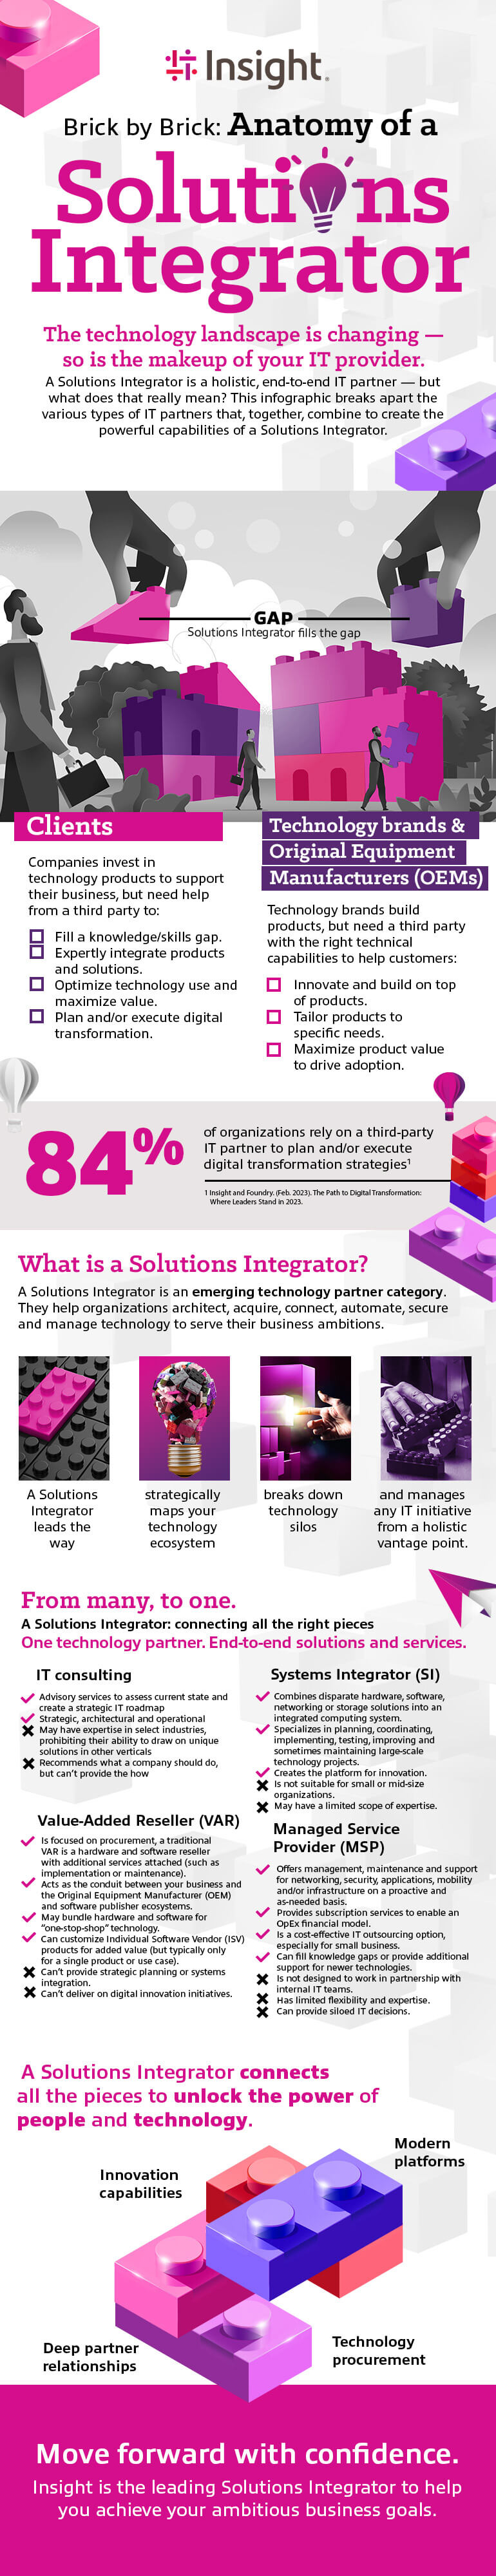 Brick by Brick: Anatomy of a Solutions Integrator infographic. as translated below.